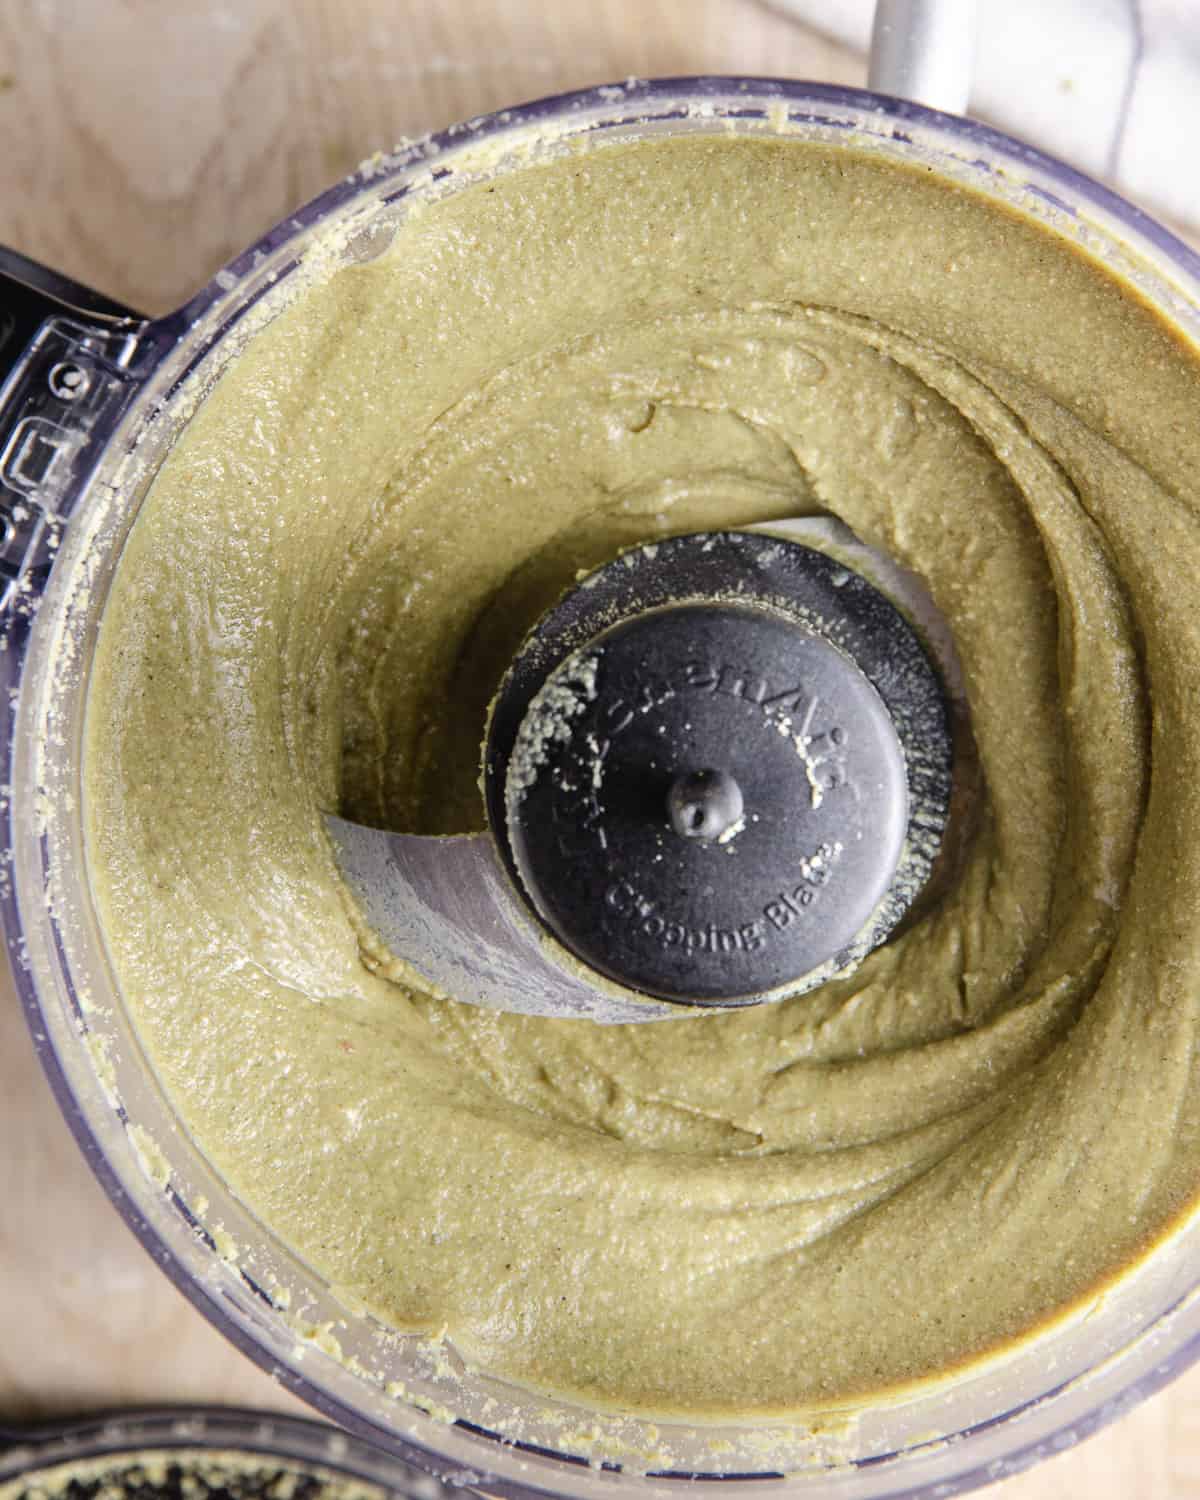 Pumpkin seed butter finished in the food processor.